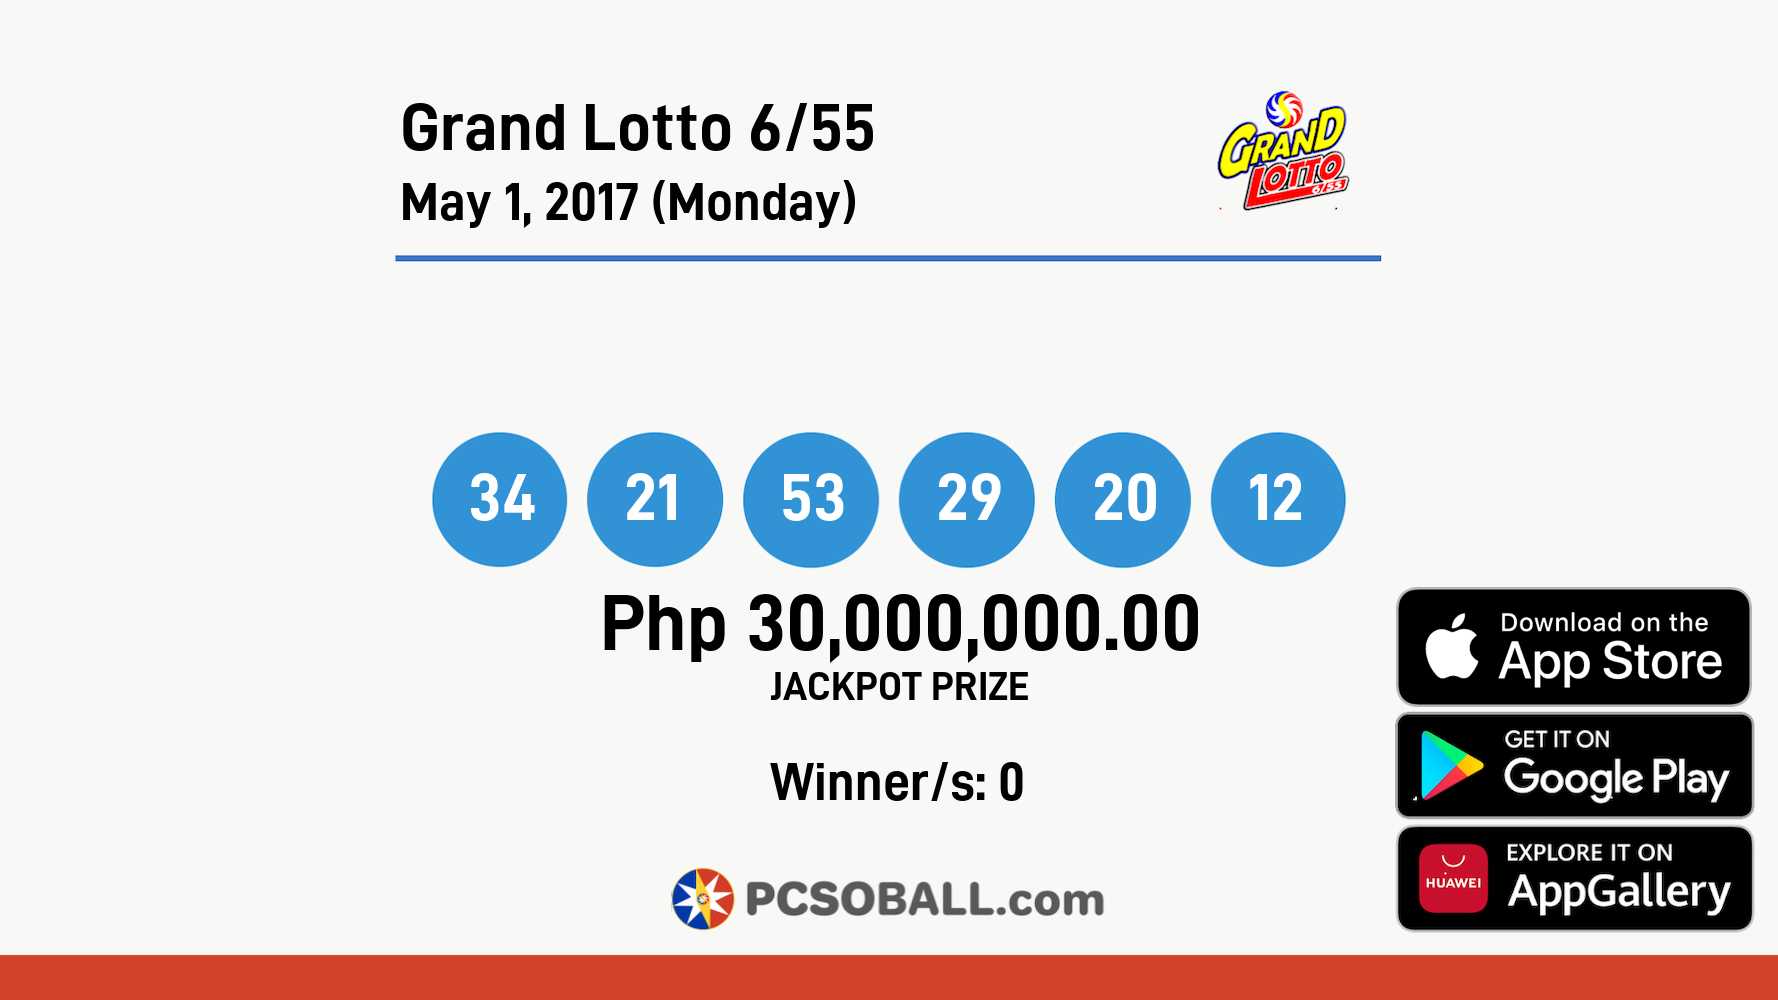 Grand Lotto 6/55 May 1, 2017 (Monday) Result